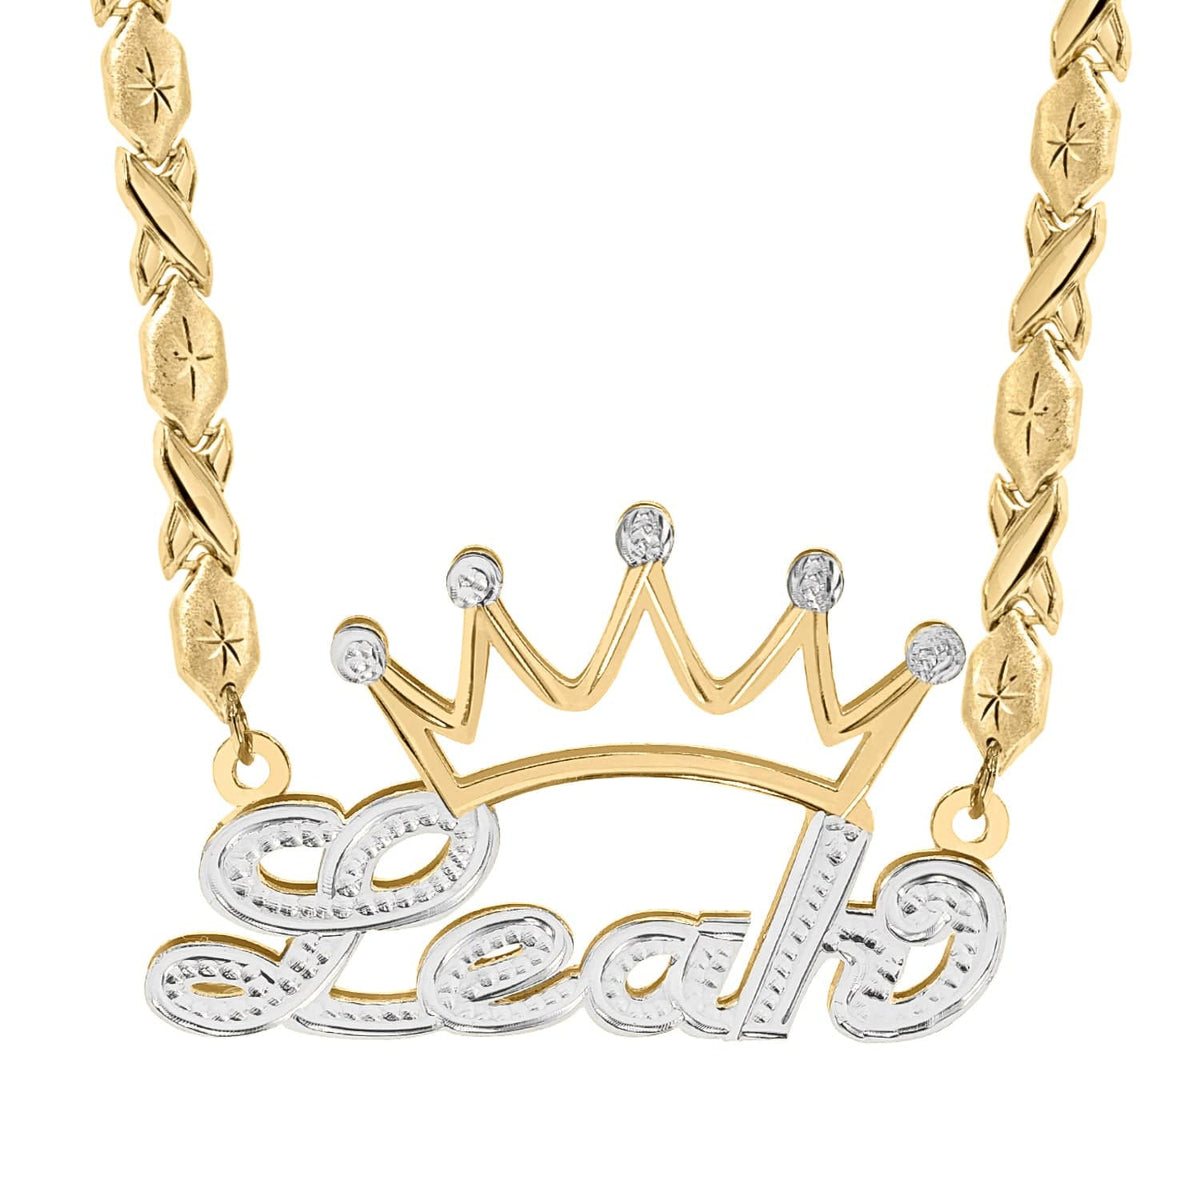 Two-Tone. Sterling Silver / Xoxo Chain Personalized Double Nameplate Necklace w/ Crown